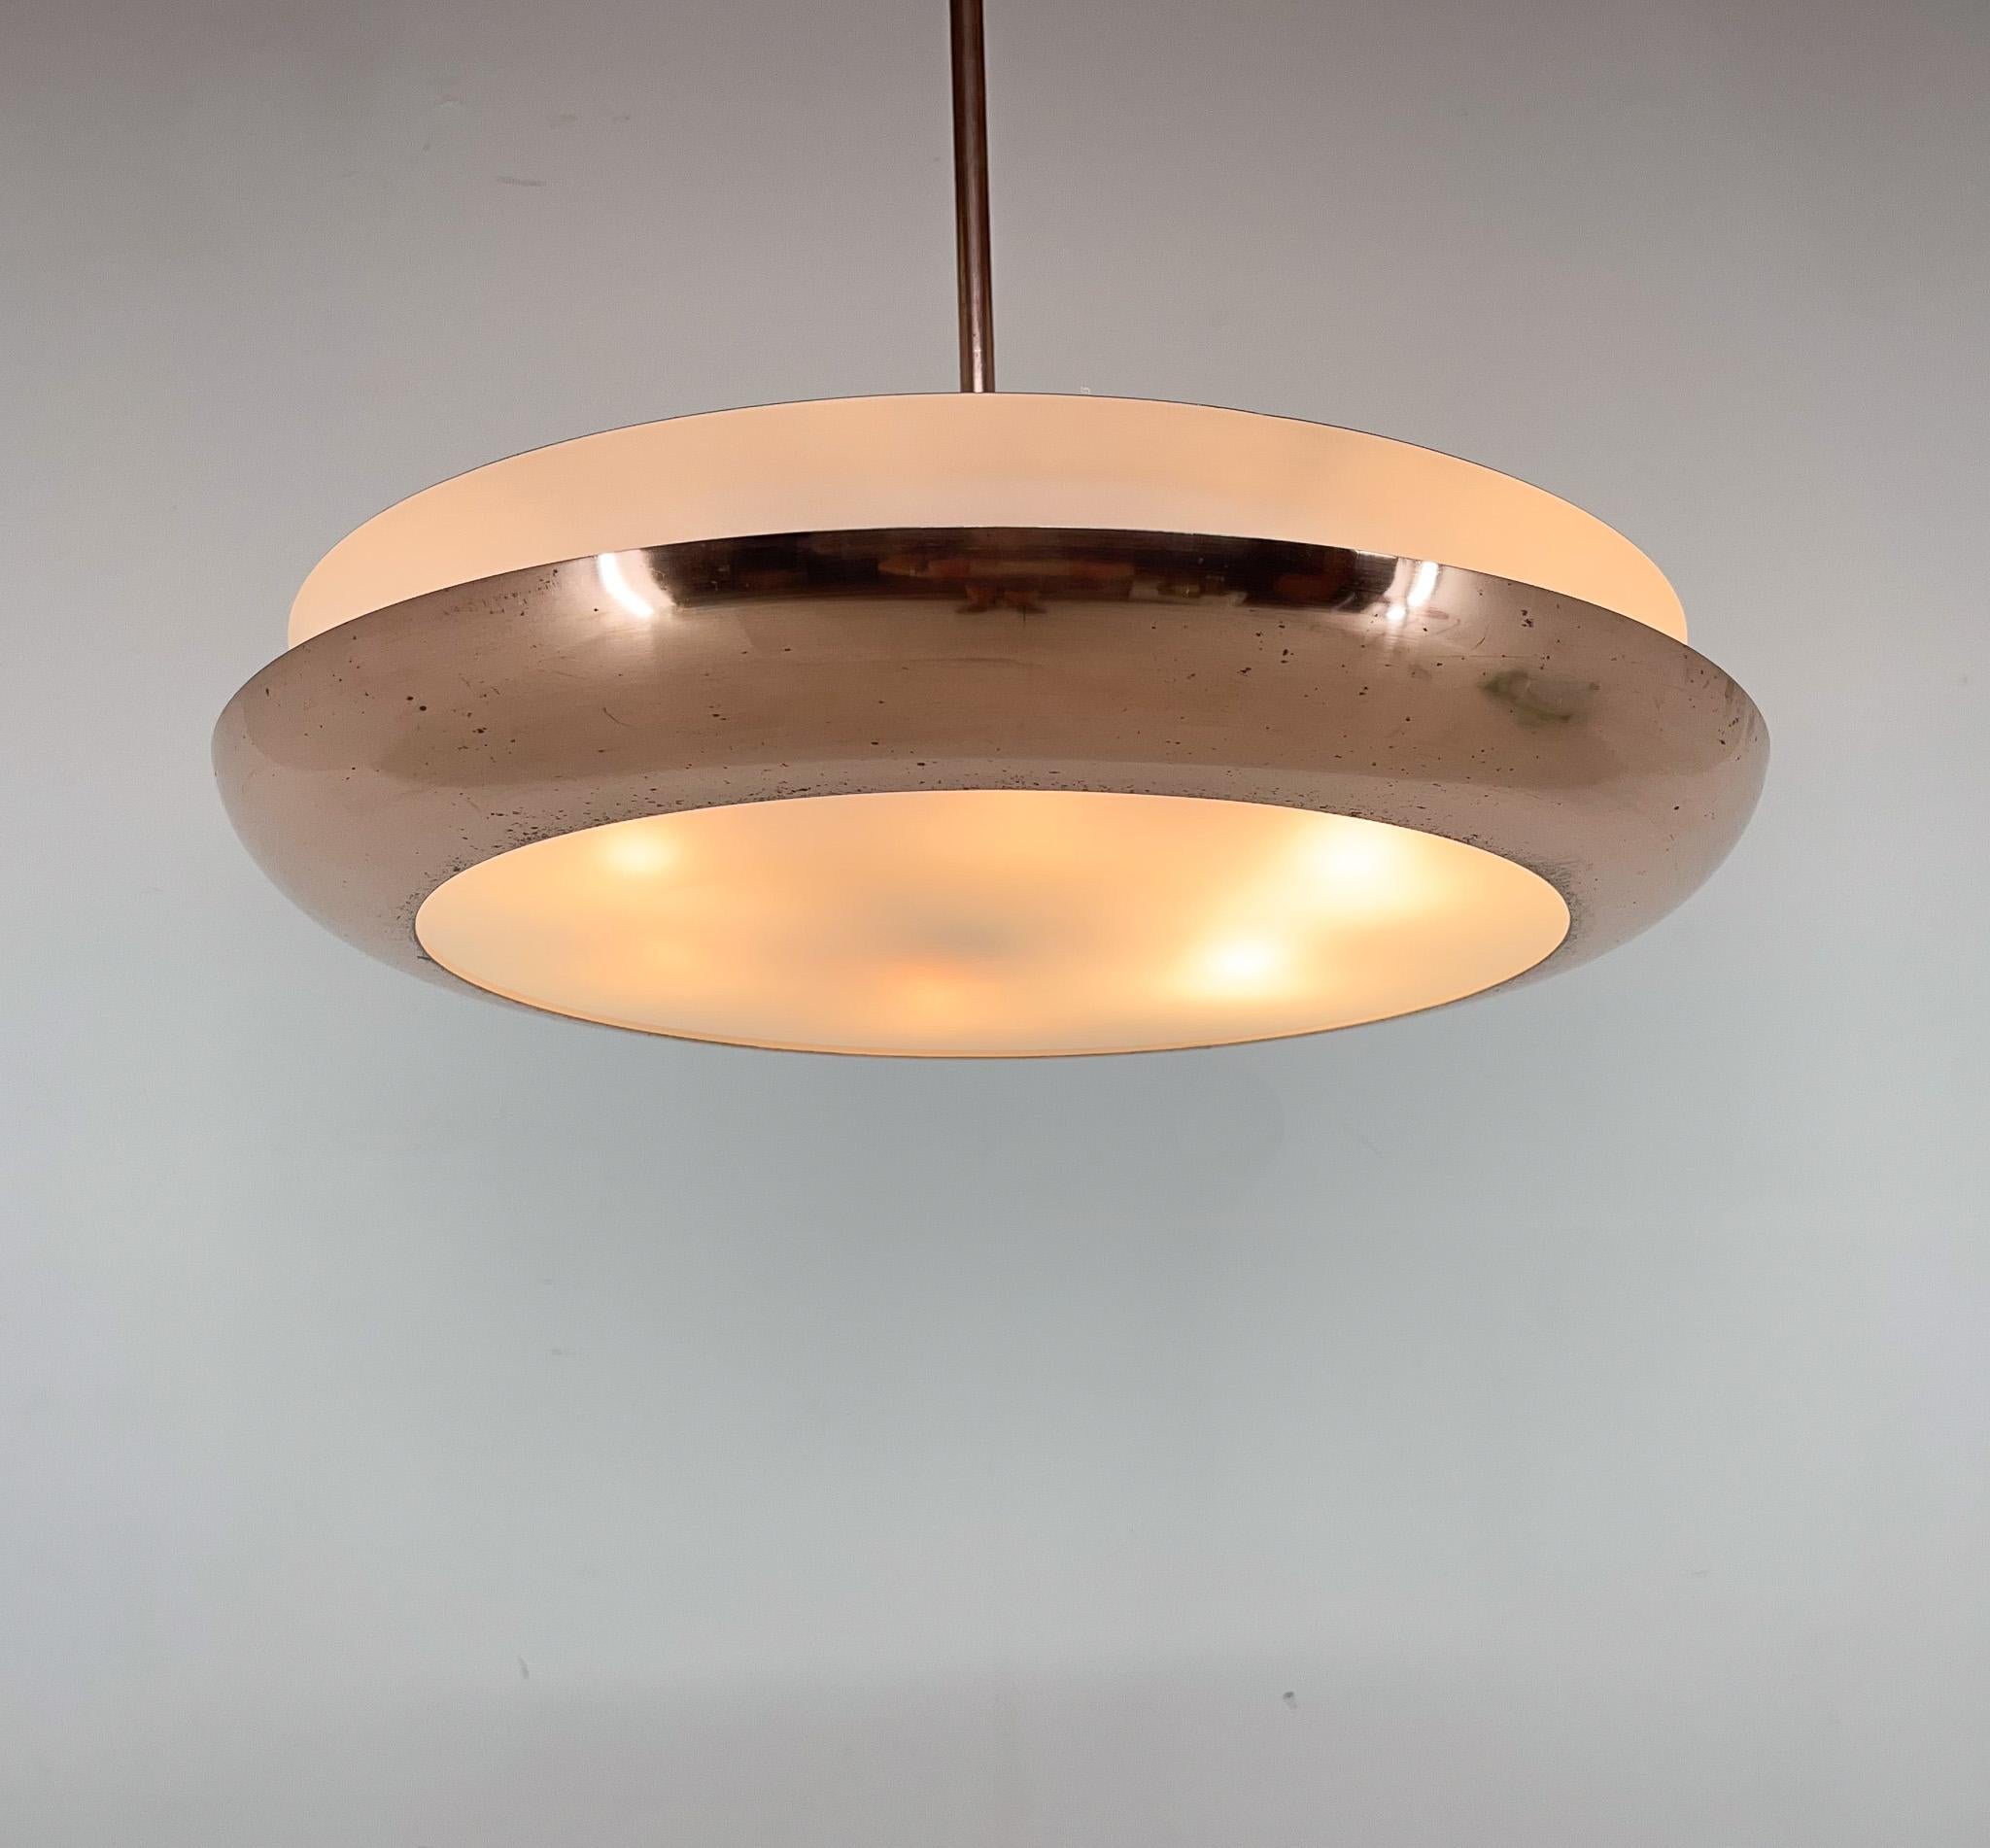 Beautiful copper and metal pendant light designed by famous Josef Hůrka for Napako in former Czechoslovakia in the 1940's. 
Restored.
Rewired:6x60W, E25-E27 bulbs. 
Central rod can be shortened on request. 
US wiring compatible.